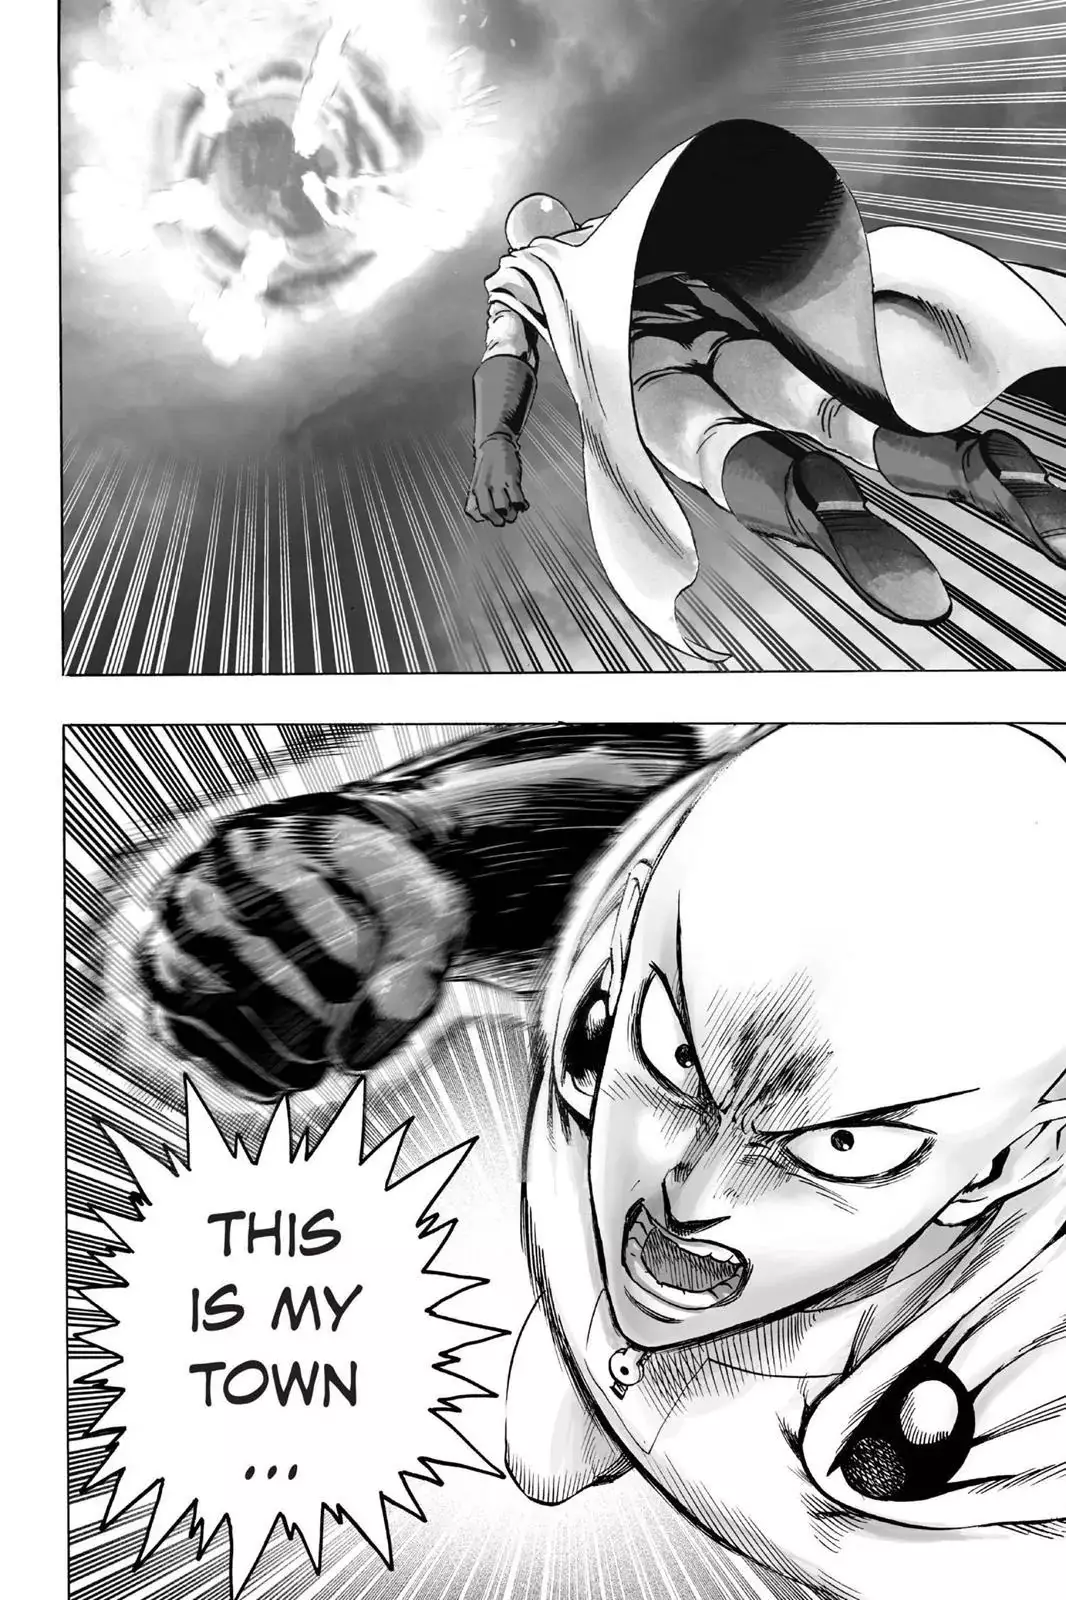 One Punch Man Chapter 21, READ One Punch Man Chapter 21 ONLINE, lost in the cloud genre,lost in the cloud gif,lost in the cloud girl,lost in the cloud goods,lost in the cloud goodreads,lost in the cloud,lost ark cloud gaming,lost odyssey cloud gaming,lost in the cloud fanart,lost in the cloud fanfic,lost in the cloud fandom,lost in the cloud first kiss,lost in the cloud font,lost in the cloud ending,lost in the cloud episode 97,lost in the cloud edit,lost in the cloud explained,lost in the cloud dog,lost in the cloud discord server,lost in the cloud desktop wallpaper,lost in the cloud drawing,can't find my cloud on network,lost in the cloud characters,lost in the cloud chapter 93 release date,lost in the cloud birthday,lost in the cloud birthday art,lost in the cloud background,lost in the cloud banner,lost in the clouds meaning,what is the black cloud in lost,lost in the cloud ao3,lost in the cloud anime,lost in the cloud art,lost in the cloud author twitter,lost in the cloud author instagram,lost in the cloud artist,lost in the cloud acrylic stand,lost in the cloud artist twitter,lost in the cloud art style,lost in the cloud analysis